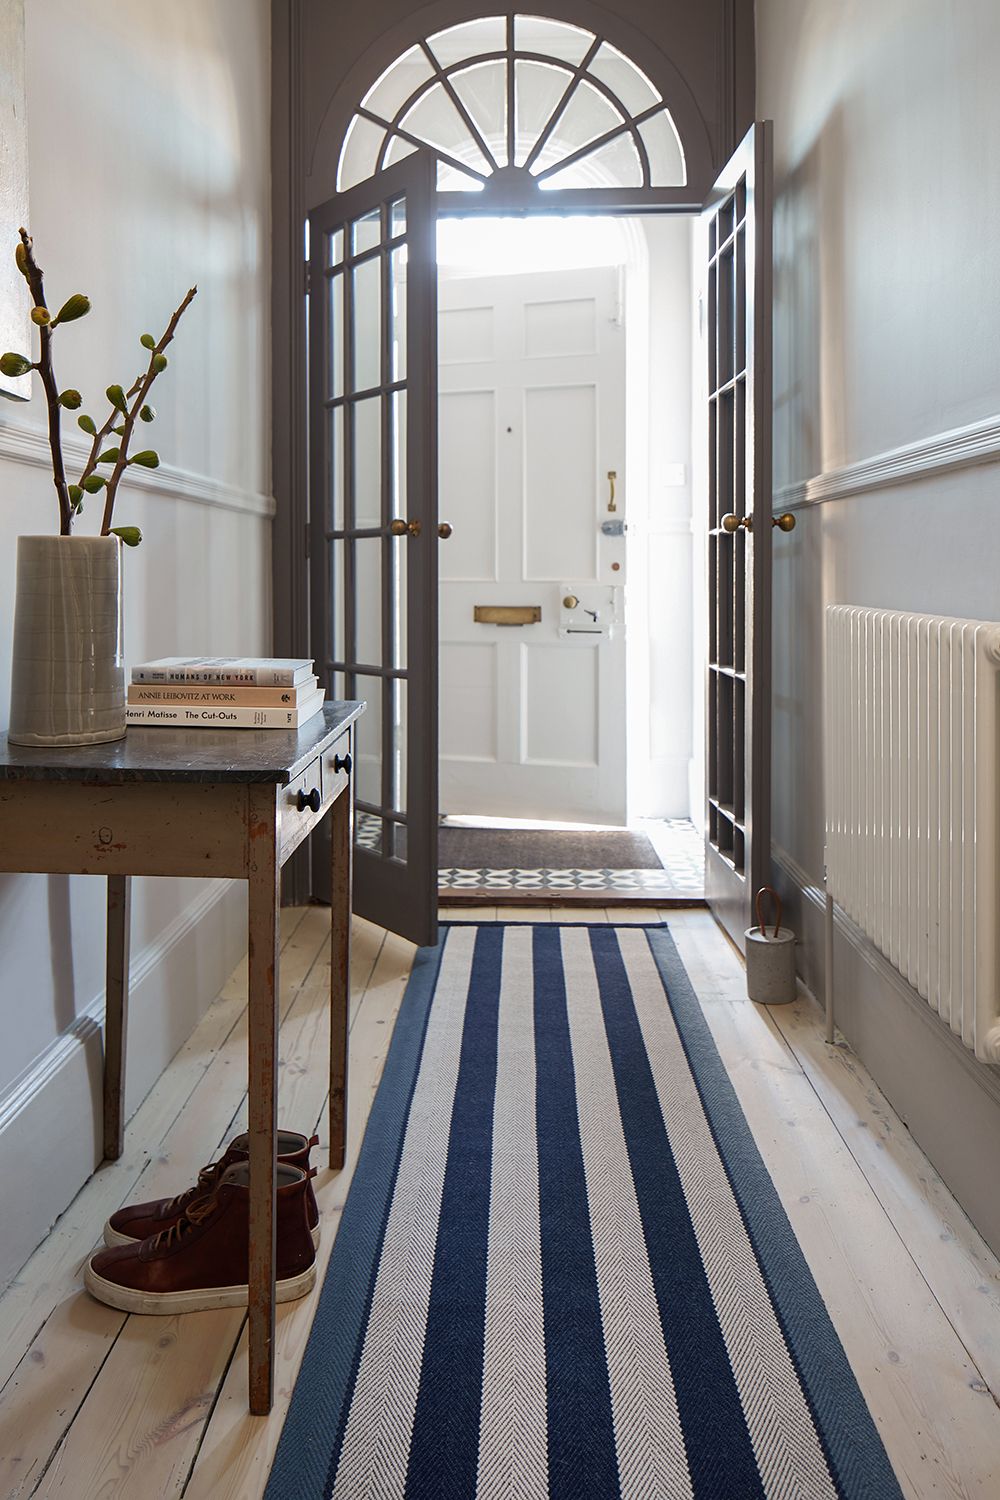 Hallway Rugs 10 Ideas To Add Style, Small Area Rugs For Entryway